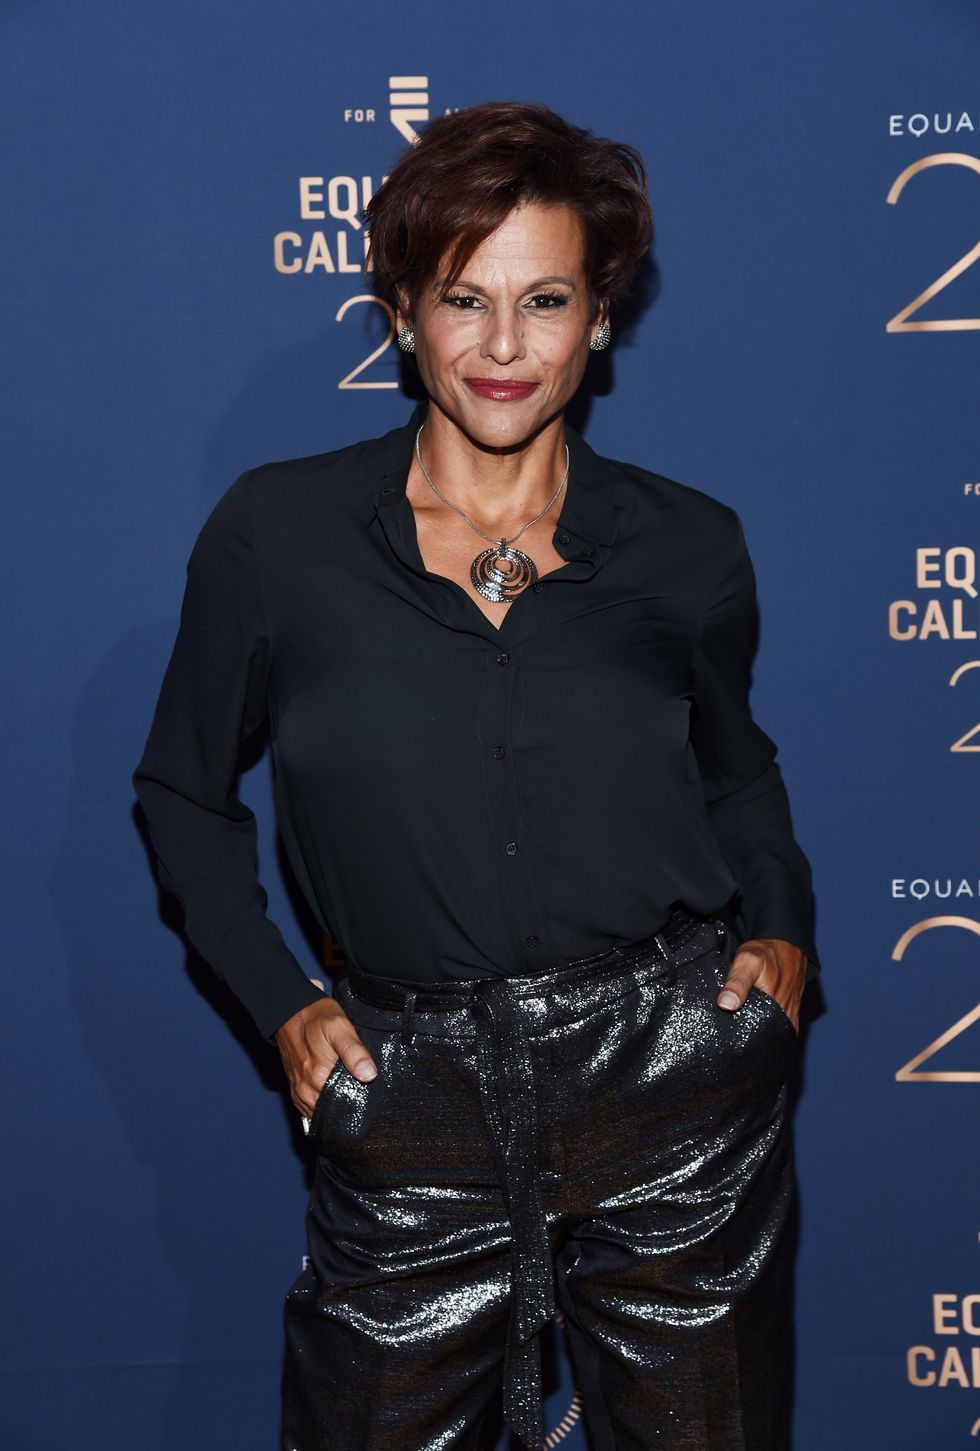 alexandra billings at the equality california los angeles equality awards 20th anniversary event